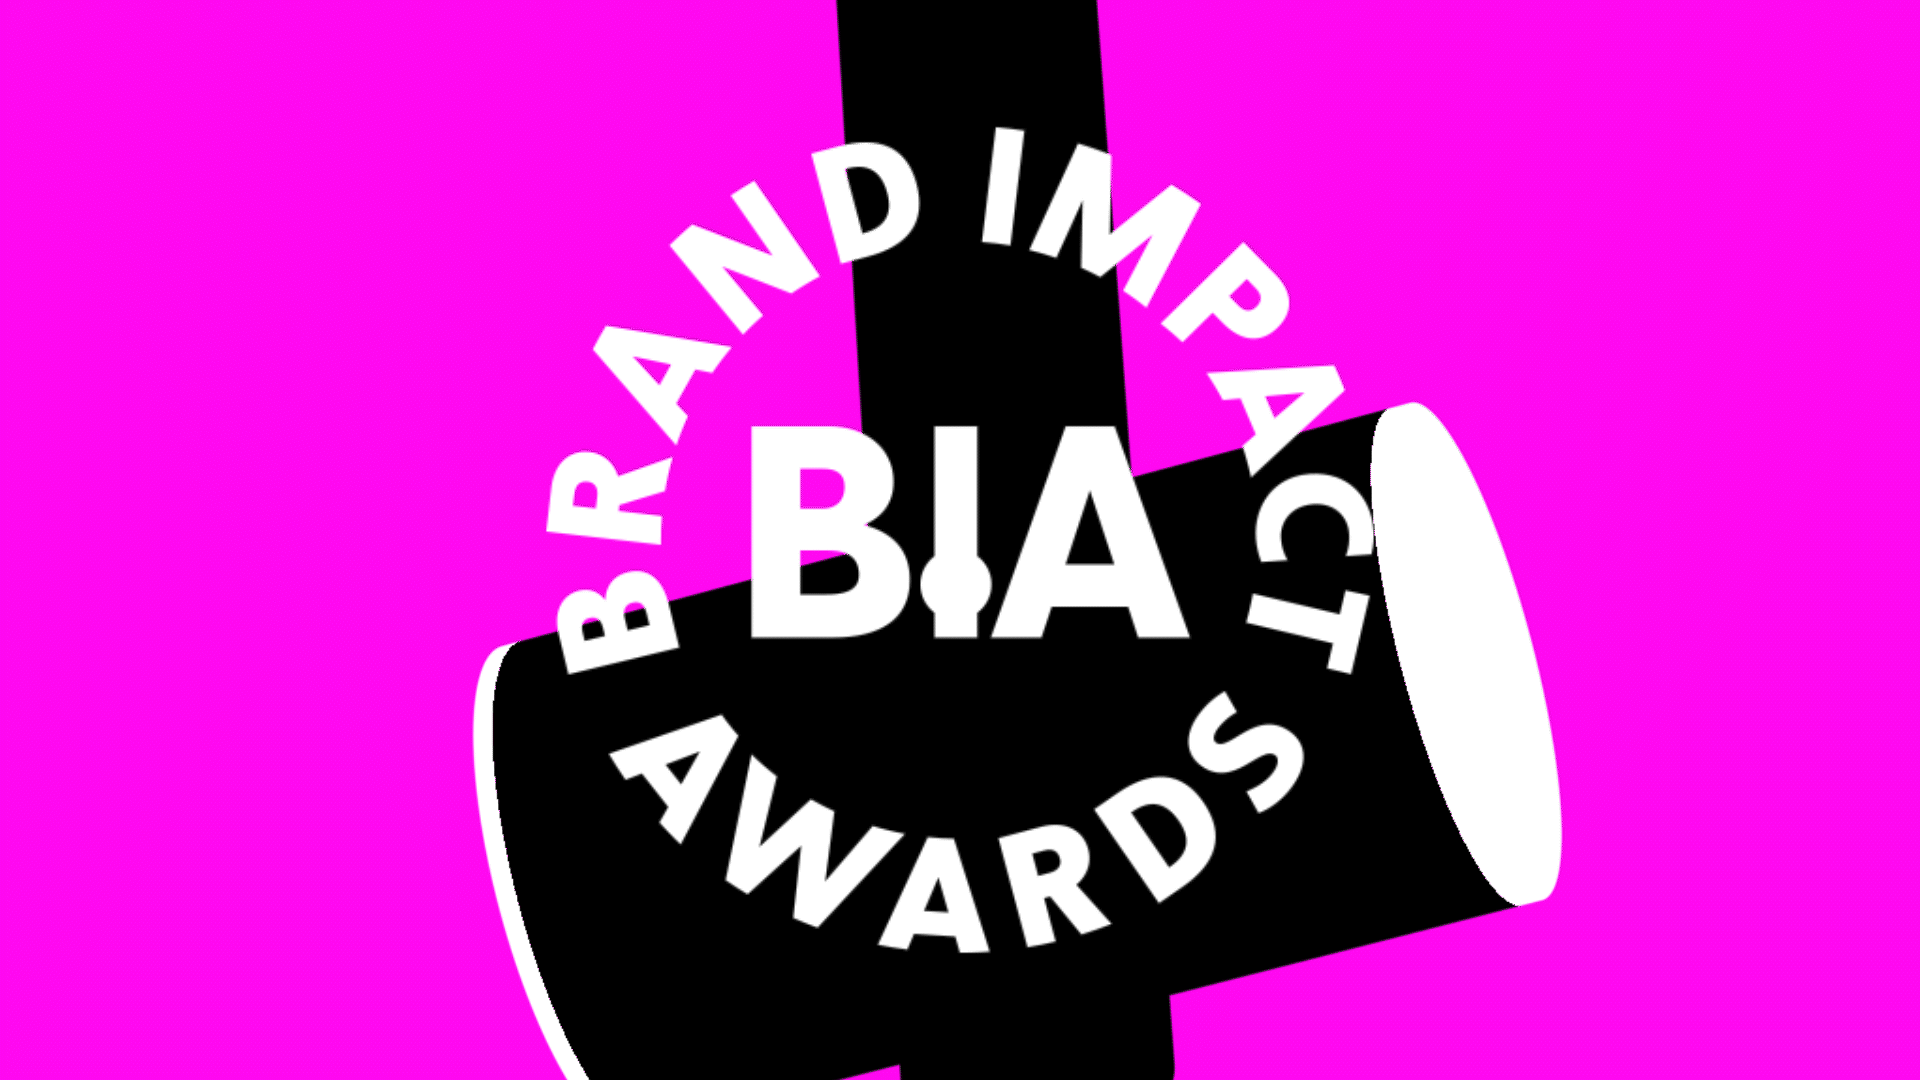 "Our strategy was to place impact at the heart of the Brand Impact Awards": Spencer Buck on rebranding the BIAs